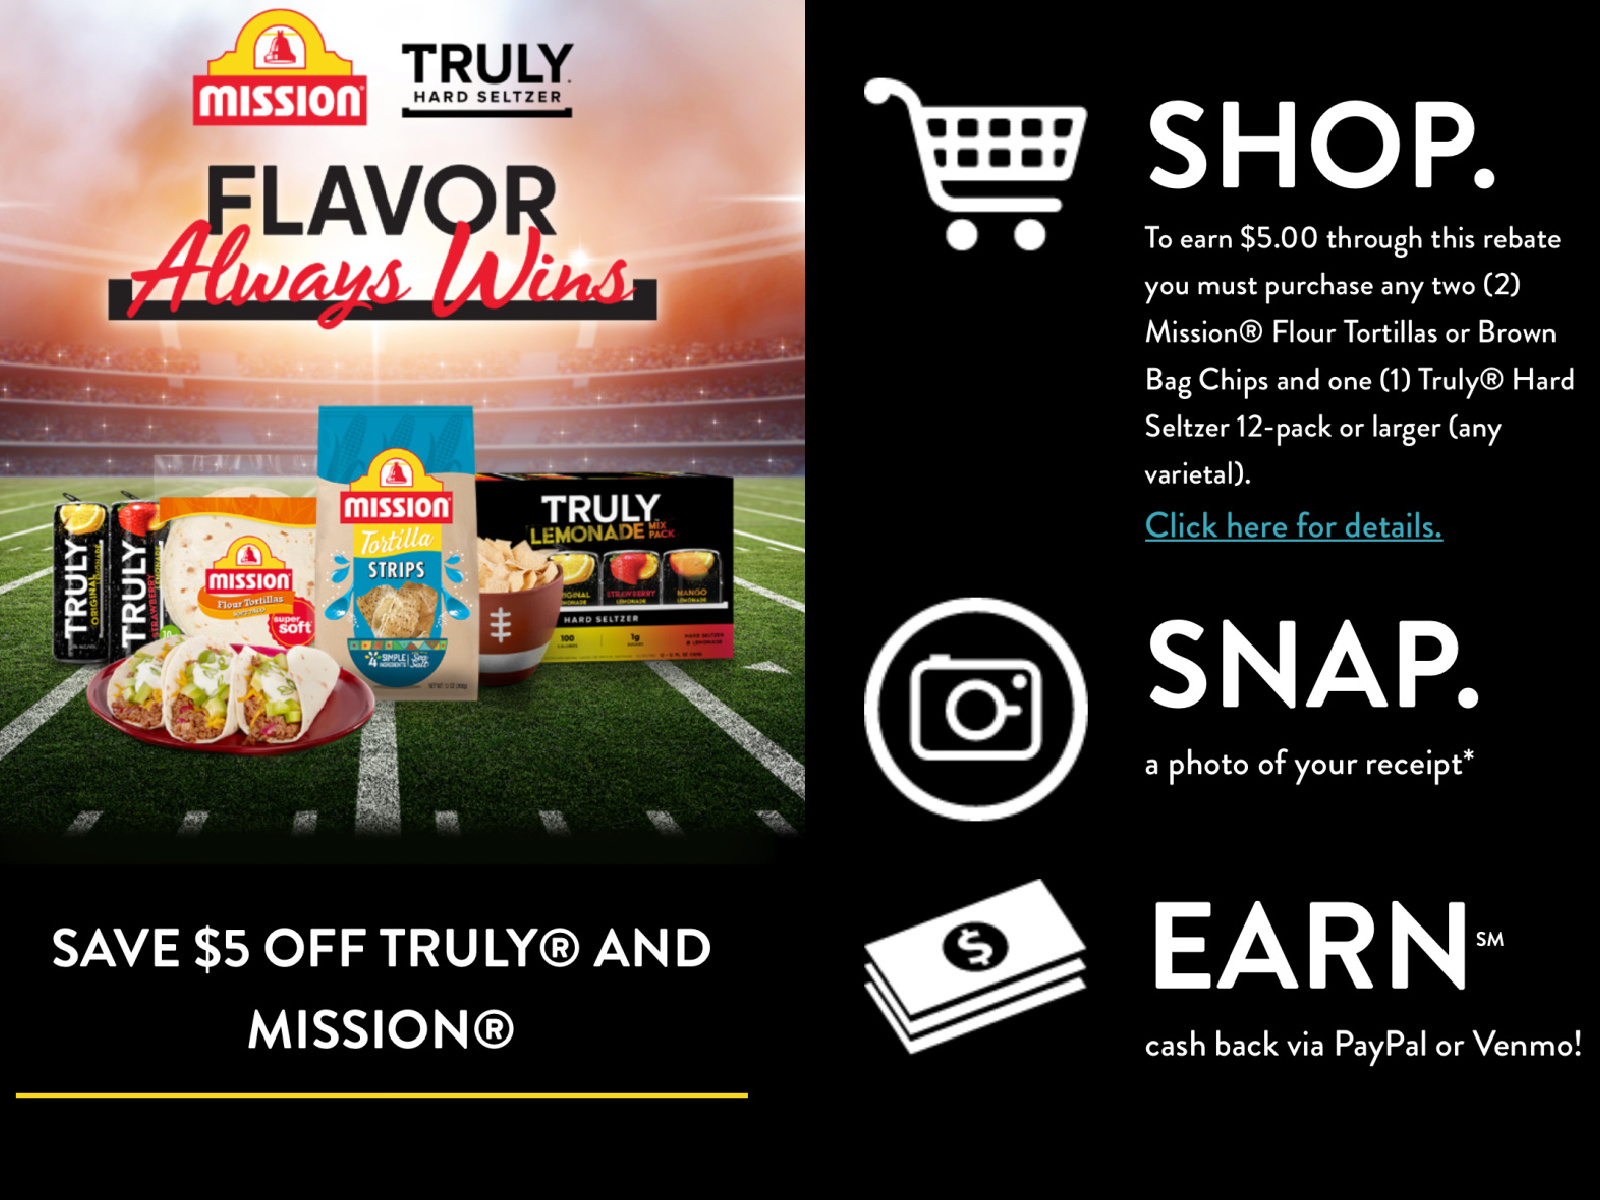 With Truly® Hard Seltzer & Mission® Flavor Always Wins - Find Everything You Need At Publix To Serve Up Great Taste On Game Day (+ Earn Cash Back!) on I Heart Publix